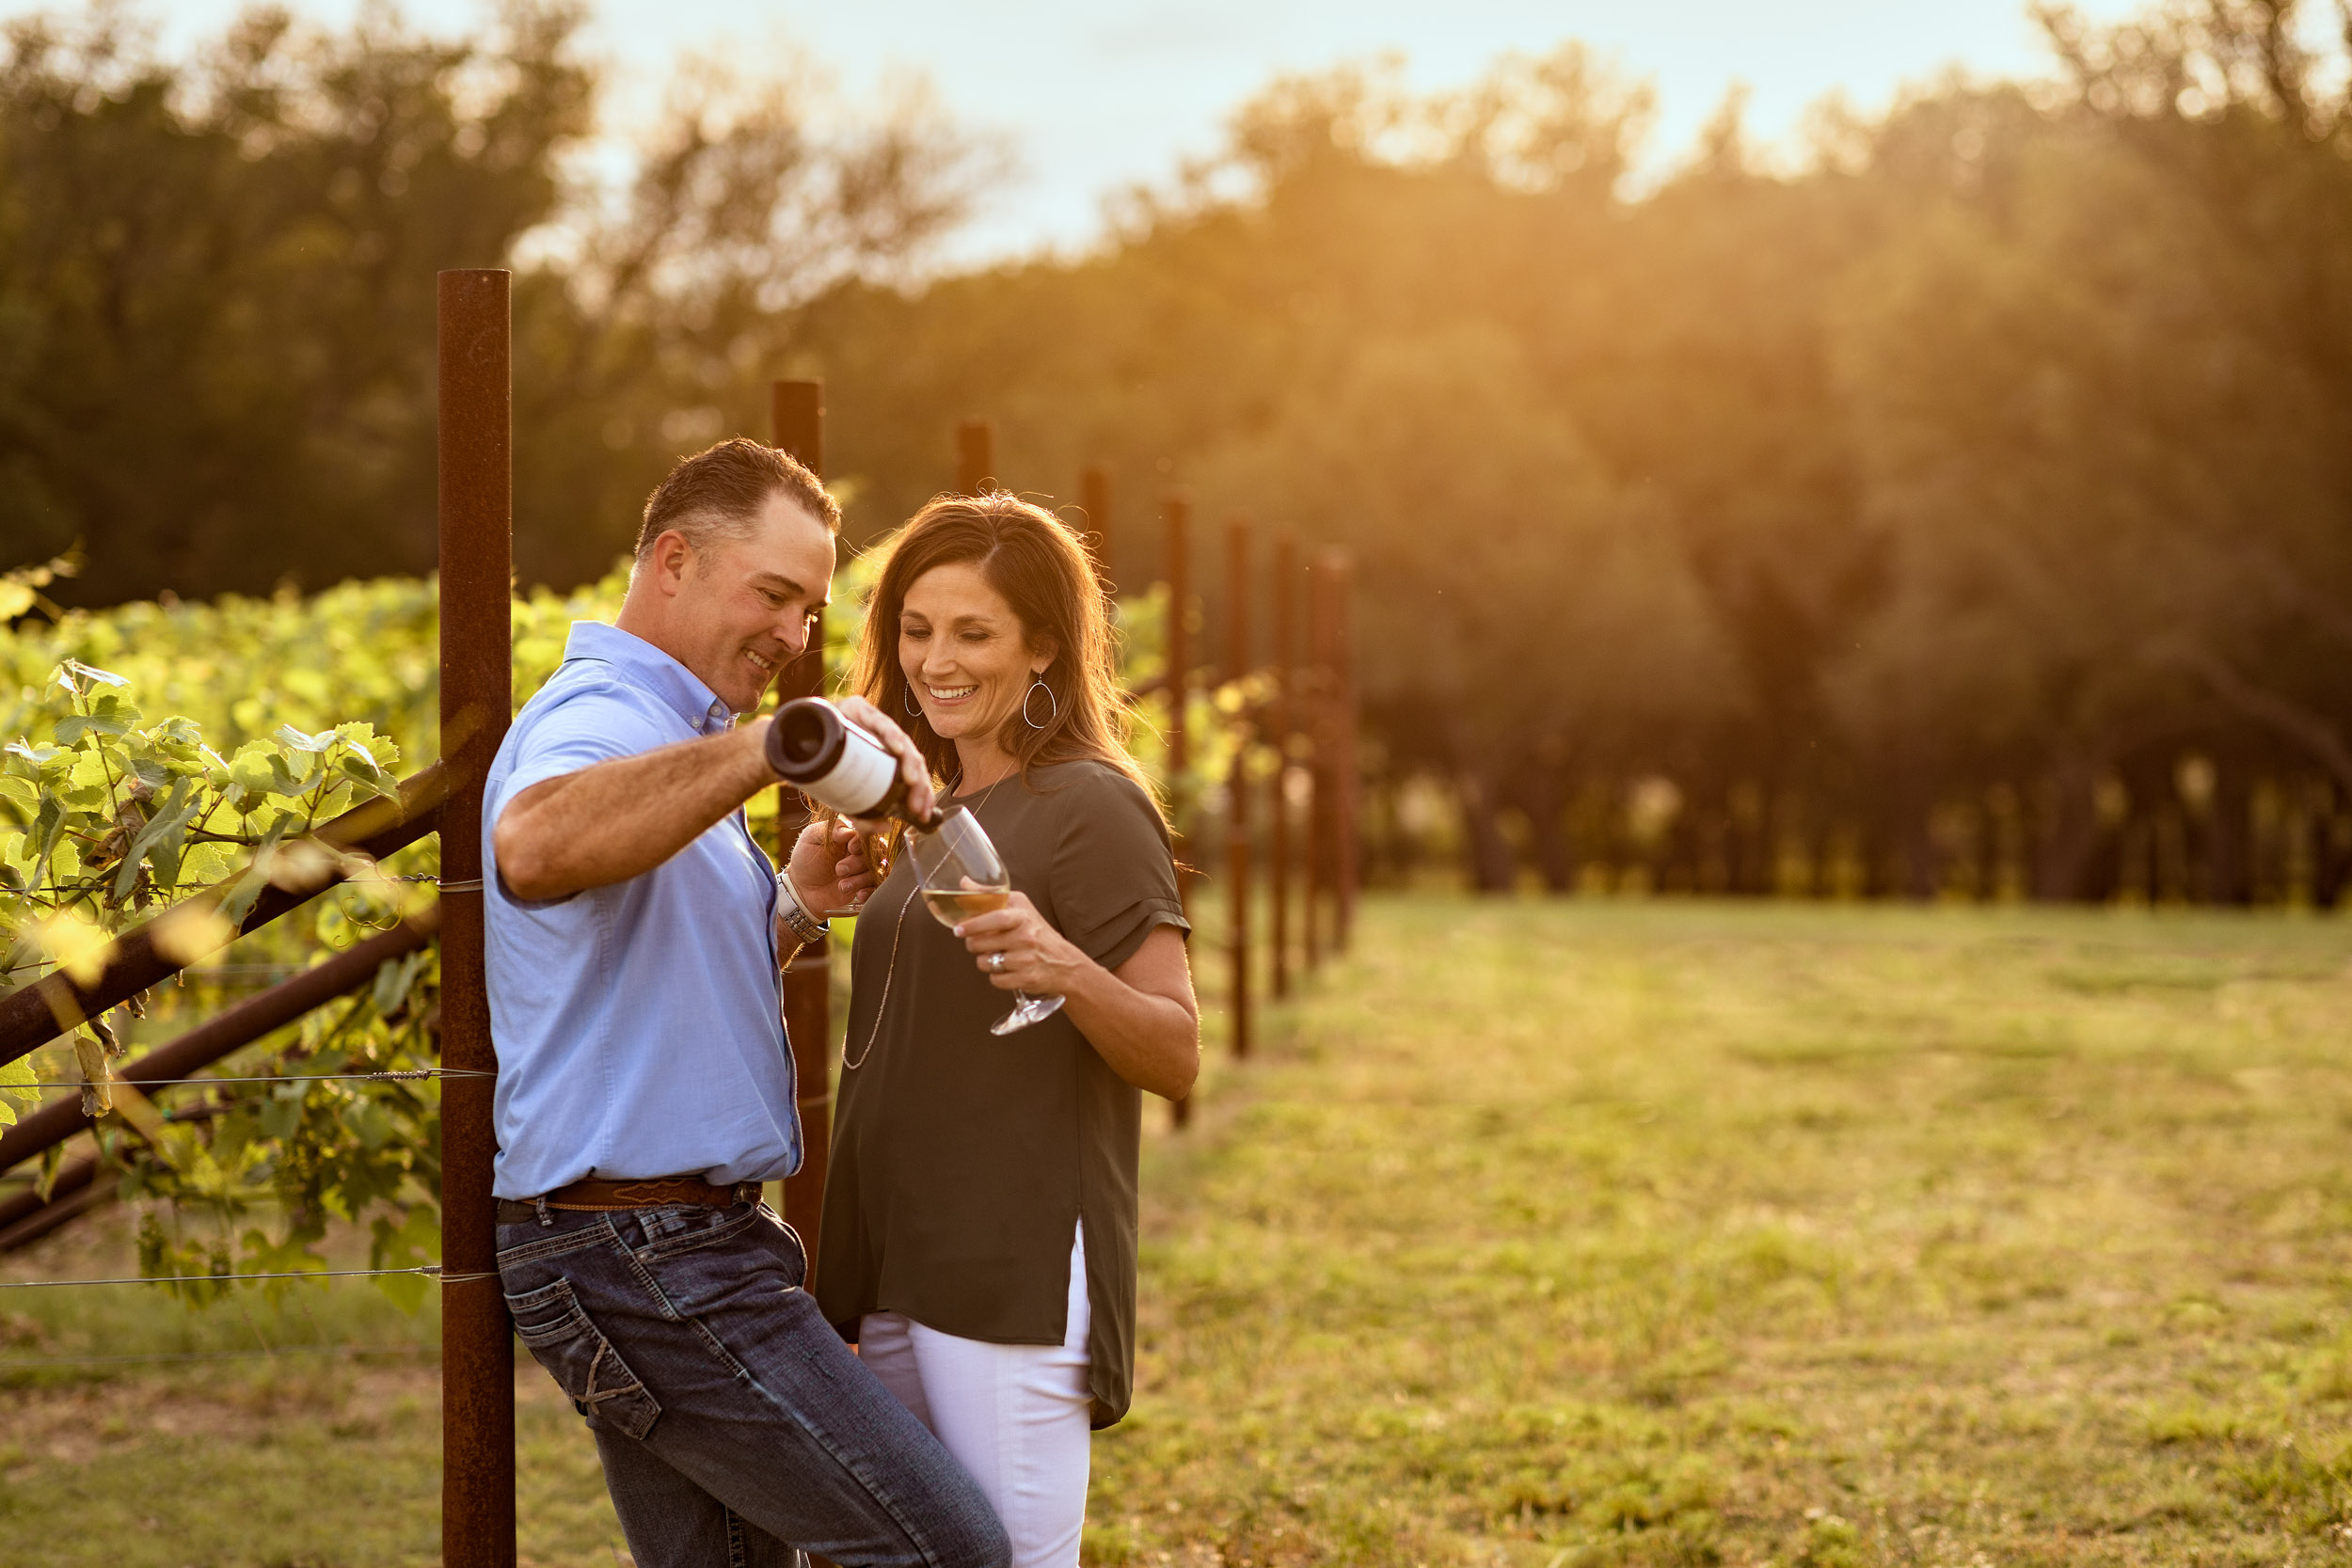 man pouring wine for woman in grape vineyard